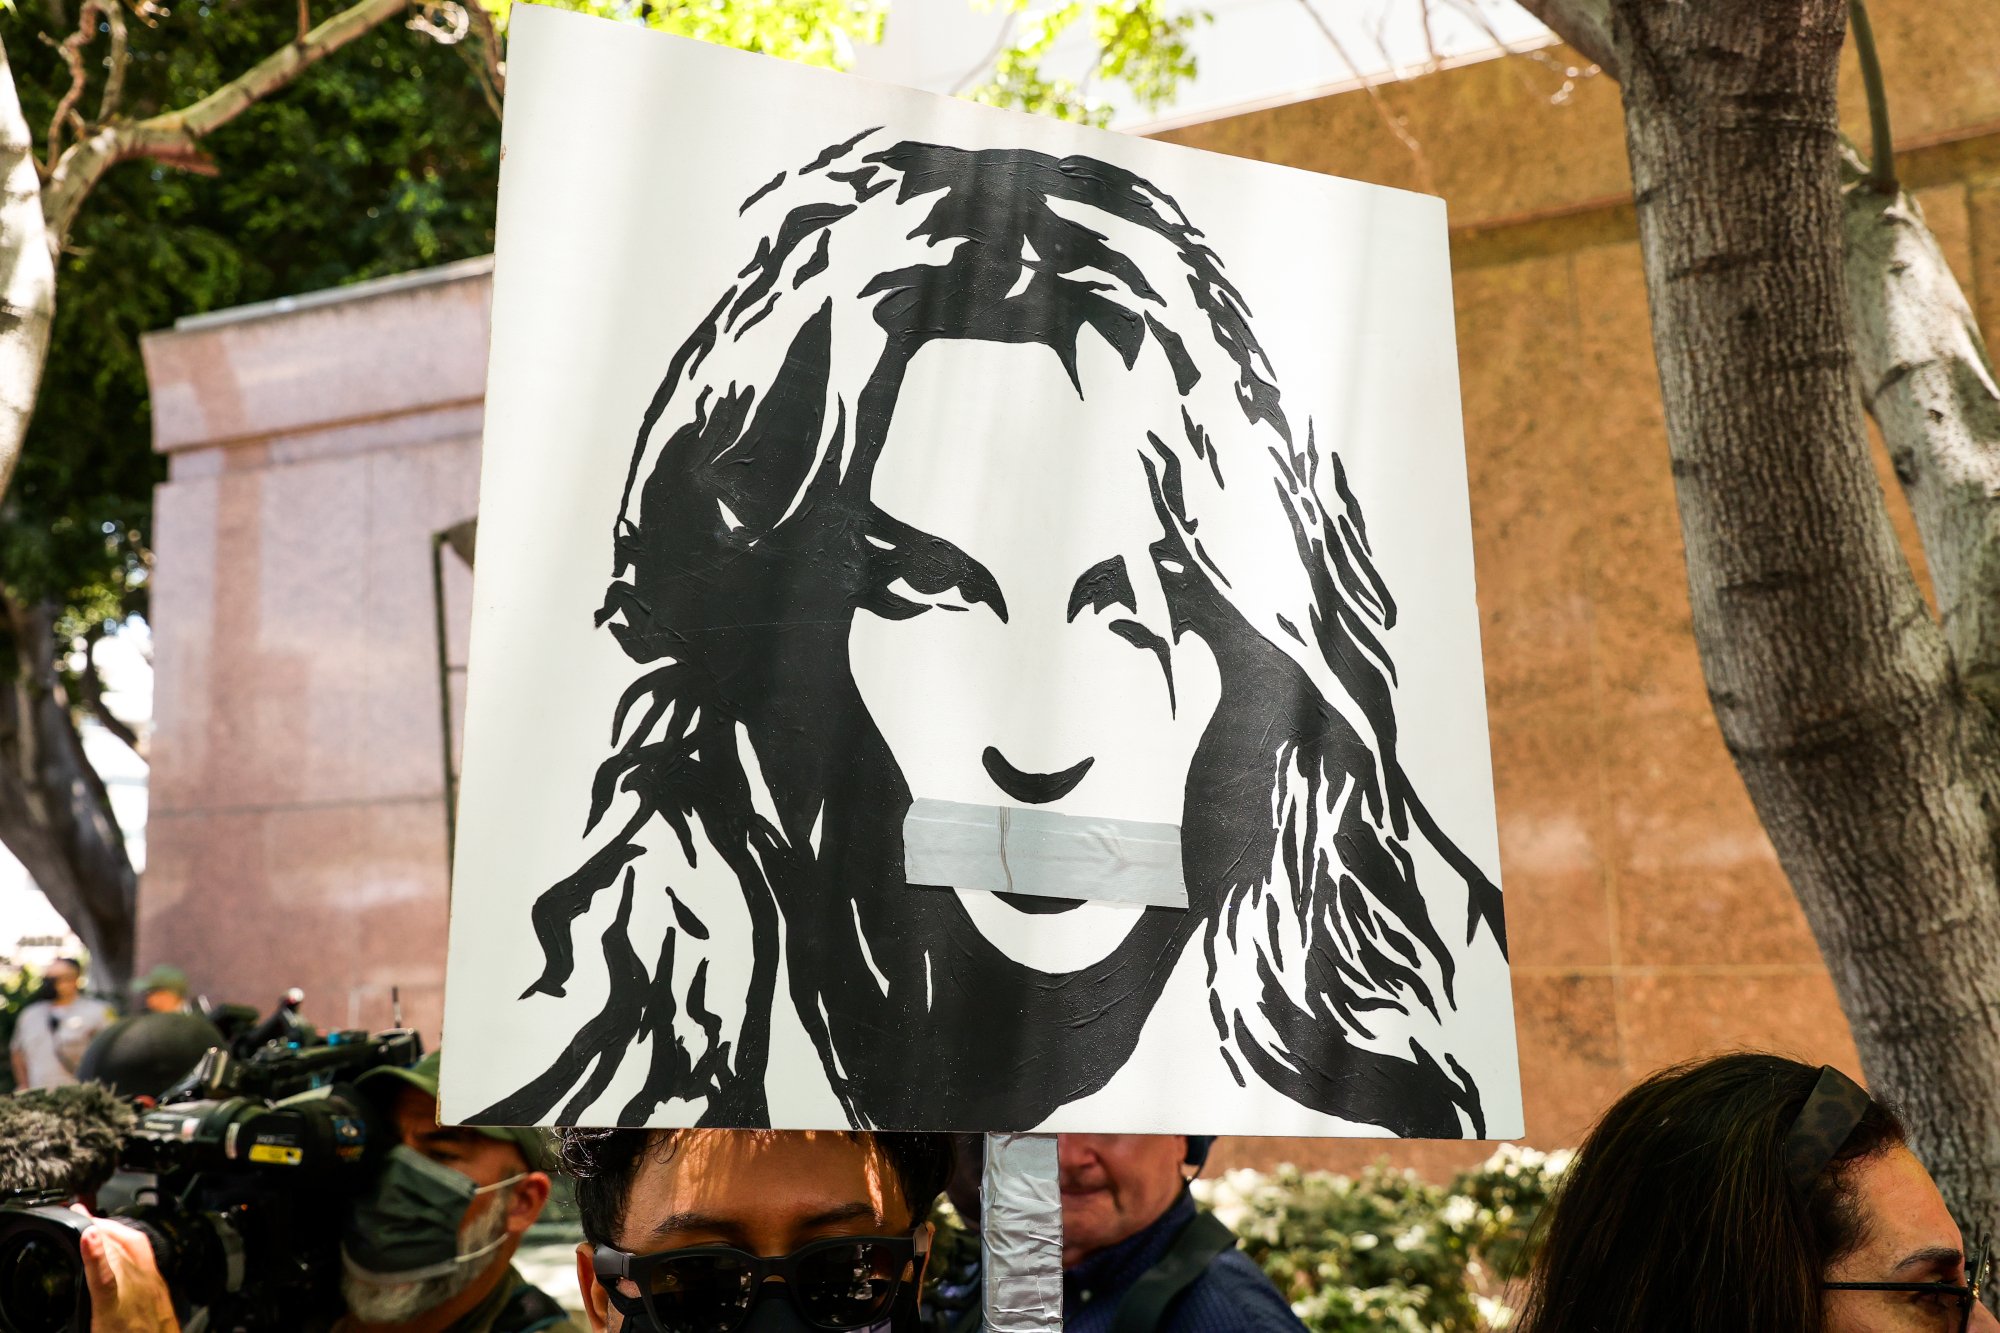 'Britney vs. Spears' #FreeBritney activists protesting during a conservatorship hearing with a poster of Britney Spears with tape over her mouth